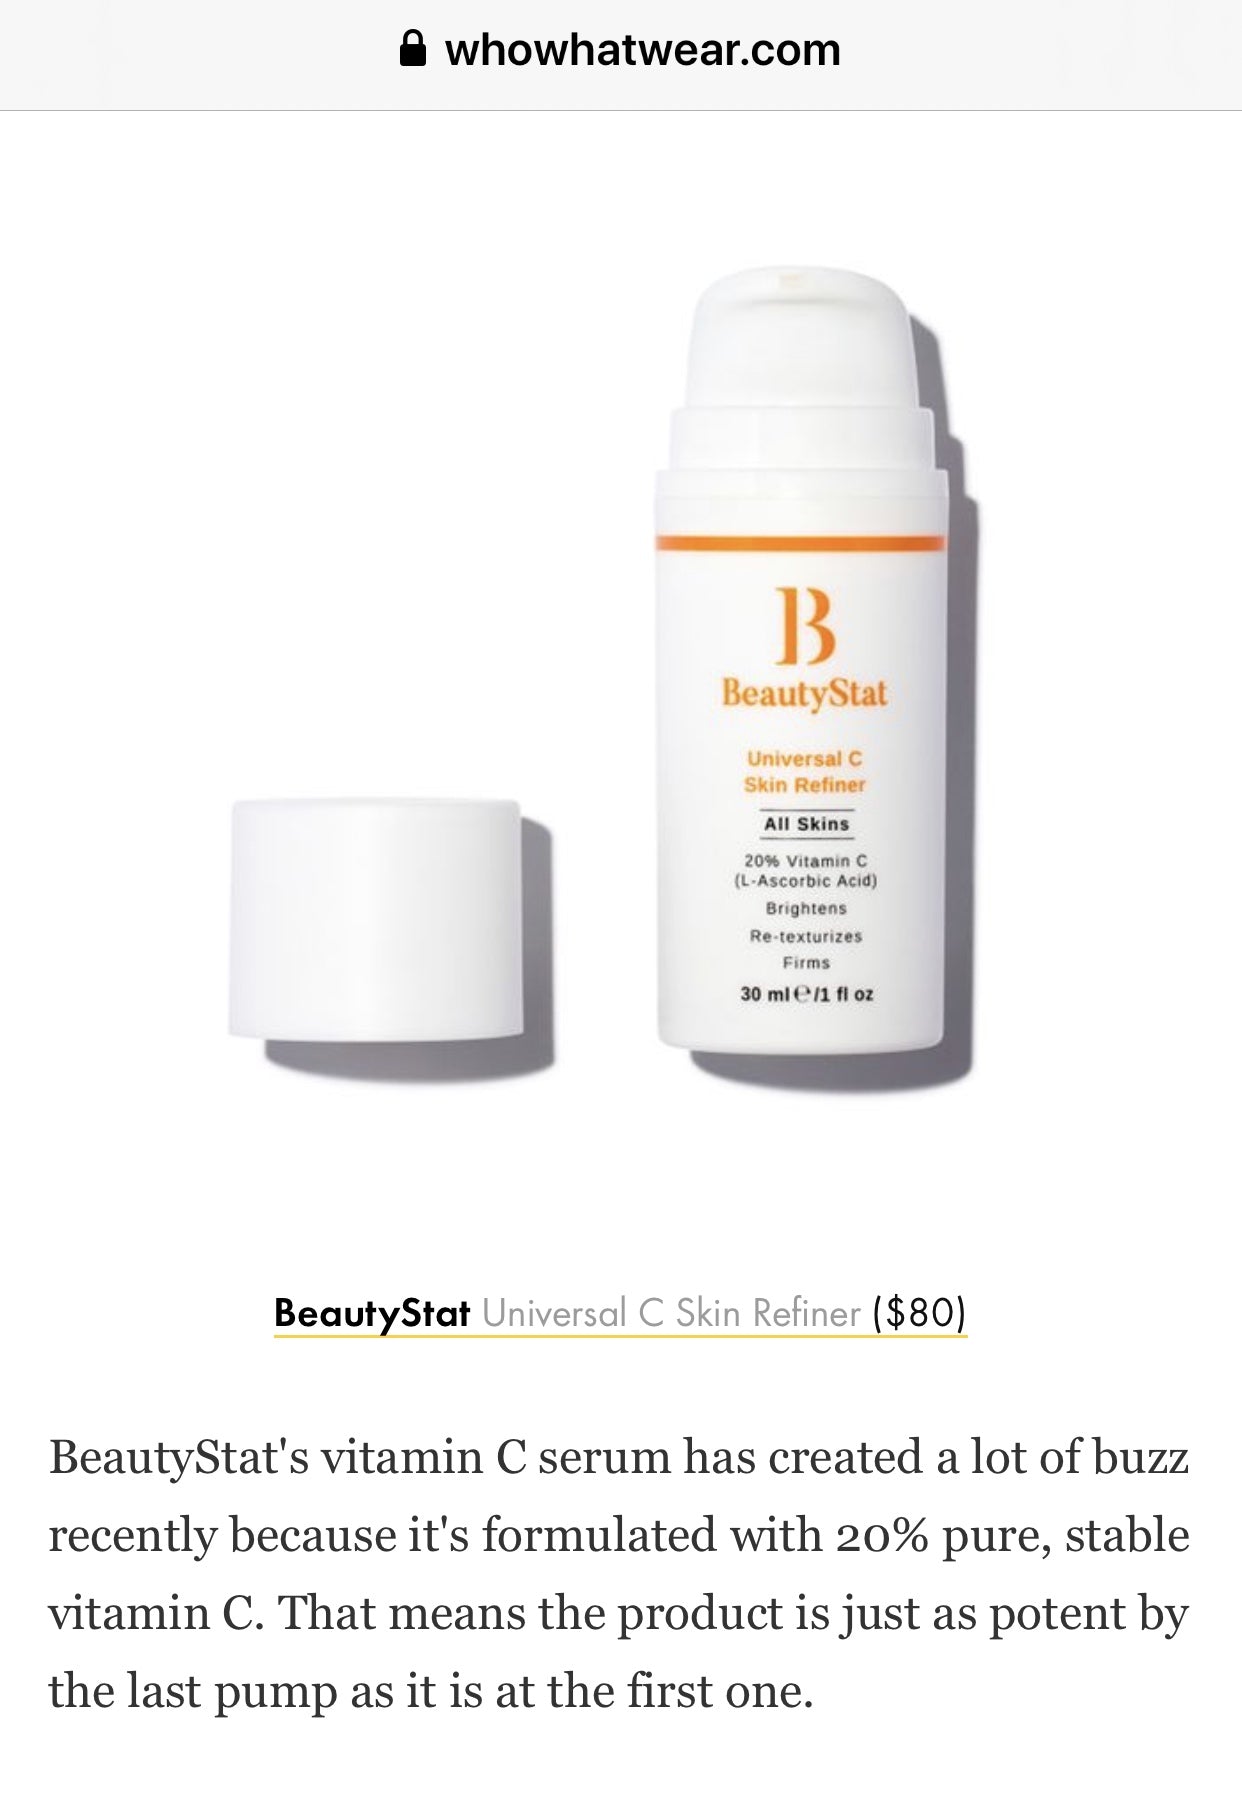 In Who What Wear: Universal C Skin Refiner Picked As Best Product To Prevent Dry Skin